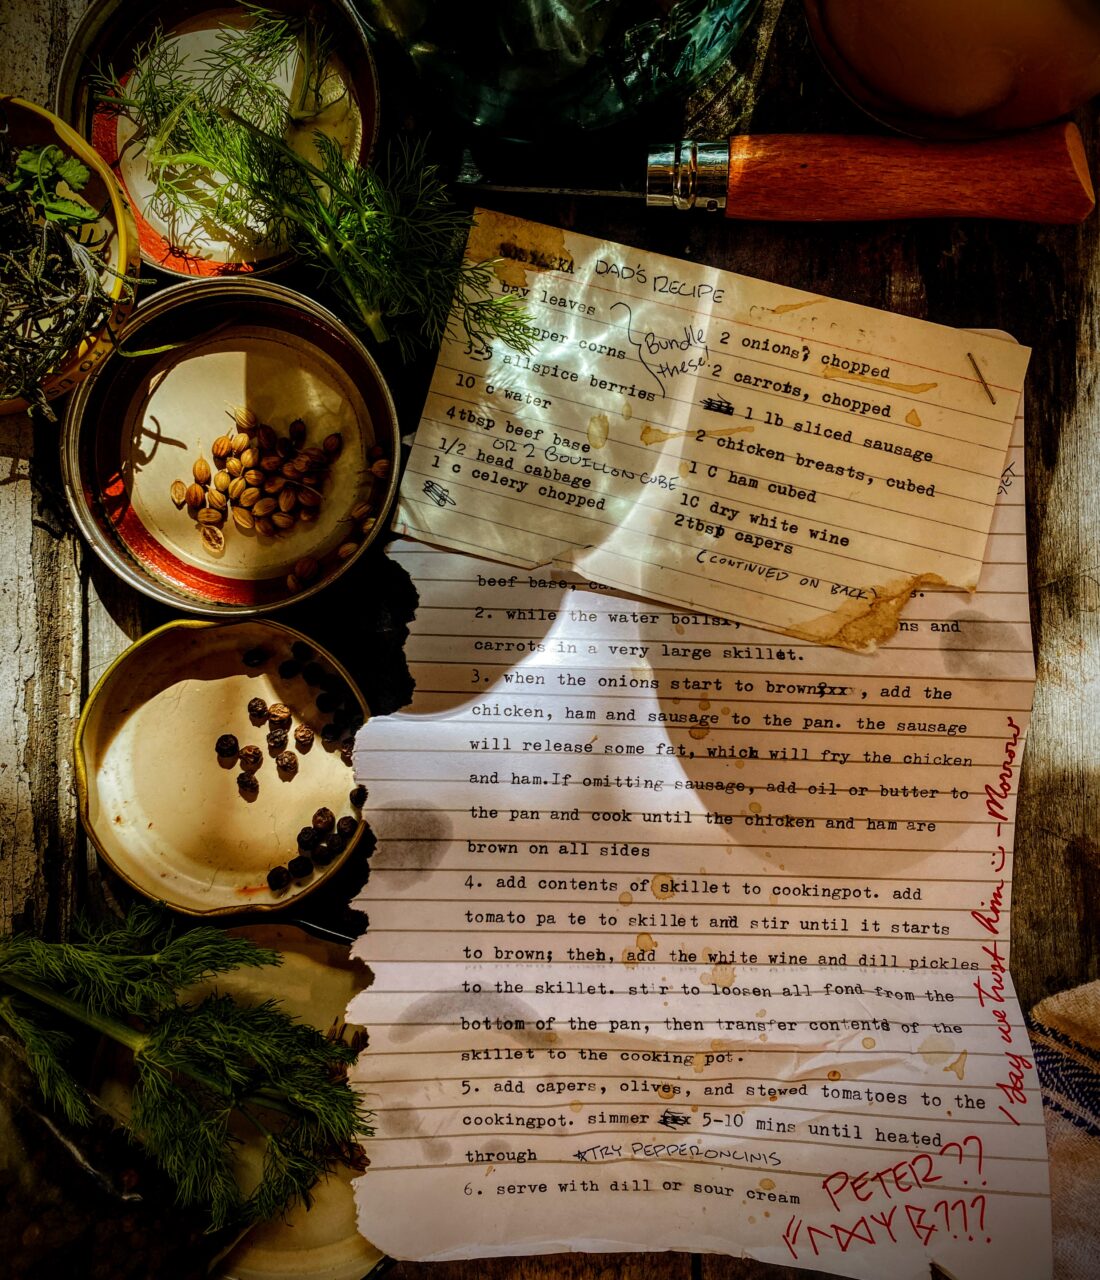 A recipe card, typewritten on an index card, stapled to a torn sheet of notebook paper with a typewritten recipe on it. Both are weathered, torn, stained, and annotated. The card is on top of weathered, scarred wood, and is surrounded by jar lids holding whole spices, dill fronds, a folding knife, and a couple of jars with preserved vegetables and meats.

Visible recipe text is as follows (all is typewritten unless otherwise indicated; see story text for recipe in full):

The name of this recipe is blurred out from damage to the recipe card. Handwritten annotation says “Dad’s Recipe.”
2 bay leaves
peppercorns
3–5 allspice berries (handwritten annotation indicates to bundle these ingredients)
10 c water
4 tablespoons beef base *handwritten annotation suggests substituting 2 bouillon cubes)
½ head cabbage
1 c celery, chopped
2 onions, chopped
2 carrots, chopped
1 pound sliced sausage
2 chicken breasts, cubed
1 cup ham, cubed
1 cup dry white wine
2 tablespoons capers
(Handwritten annotation reads “continued on back.”)
The index card overlaps the recipe page. The recipe visible on the page is as follows:
2. While the water boils [obscured] and carrots in a very large skillet.
3. When the onions start to brown, add the sausage, chicken, and ham to the pan. The sausage will release some fat, which will fry the chicken and ham. If omitting sausage, add oil or butter to the pan and cook until the chicken and ham are brown on all sides.
4. Add the contents of the skillet to the cooking pot. Add tomato paste to the skillet and stir until it starts to brown; then, add the white wine and dill pickles to the skillet. Stir to loosen all fond from the bottom of the pan, then transfer contents of the skillet to the cooking pot.
5. Add capers, olives, and stewed tomatoes to the cooking pot. Simmer 5–10 minutes until heated through. (Handwritten annotation reads “*try pepperoncinis”)
6. Serve with dill or sour cream

A handwritten note in different handwriting from the recipe annotations, in red marker, reads: “Peter??” followed by a series of runes. Next to that, running up the side of the page, a handwritten note in sweet cursive, also in red marker, reads “I say we trust him :) -morrow”
